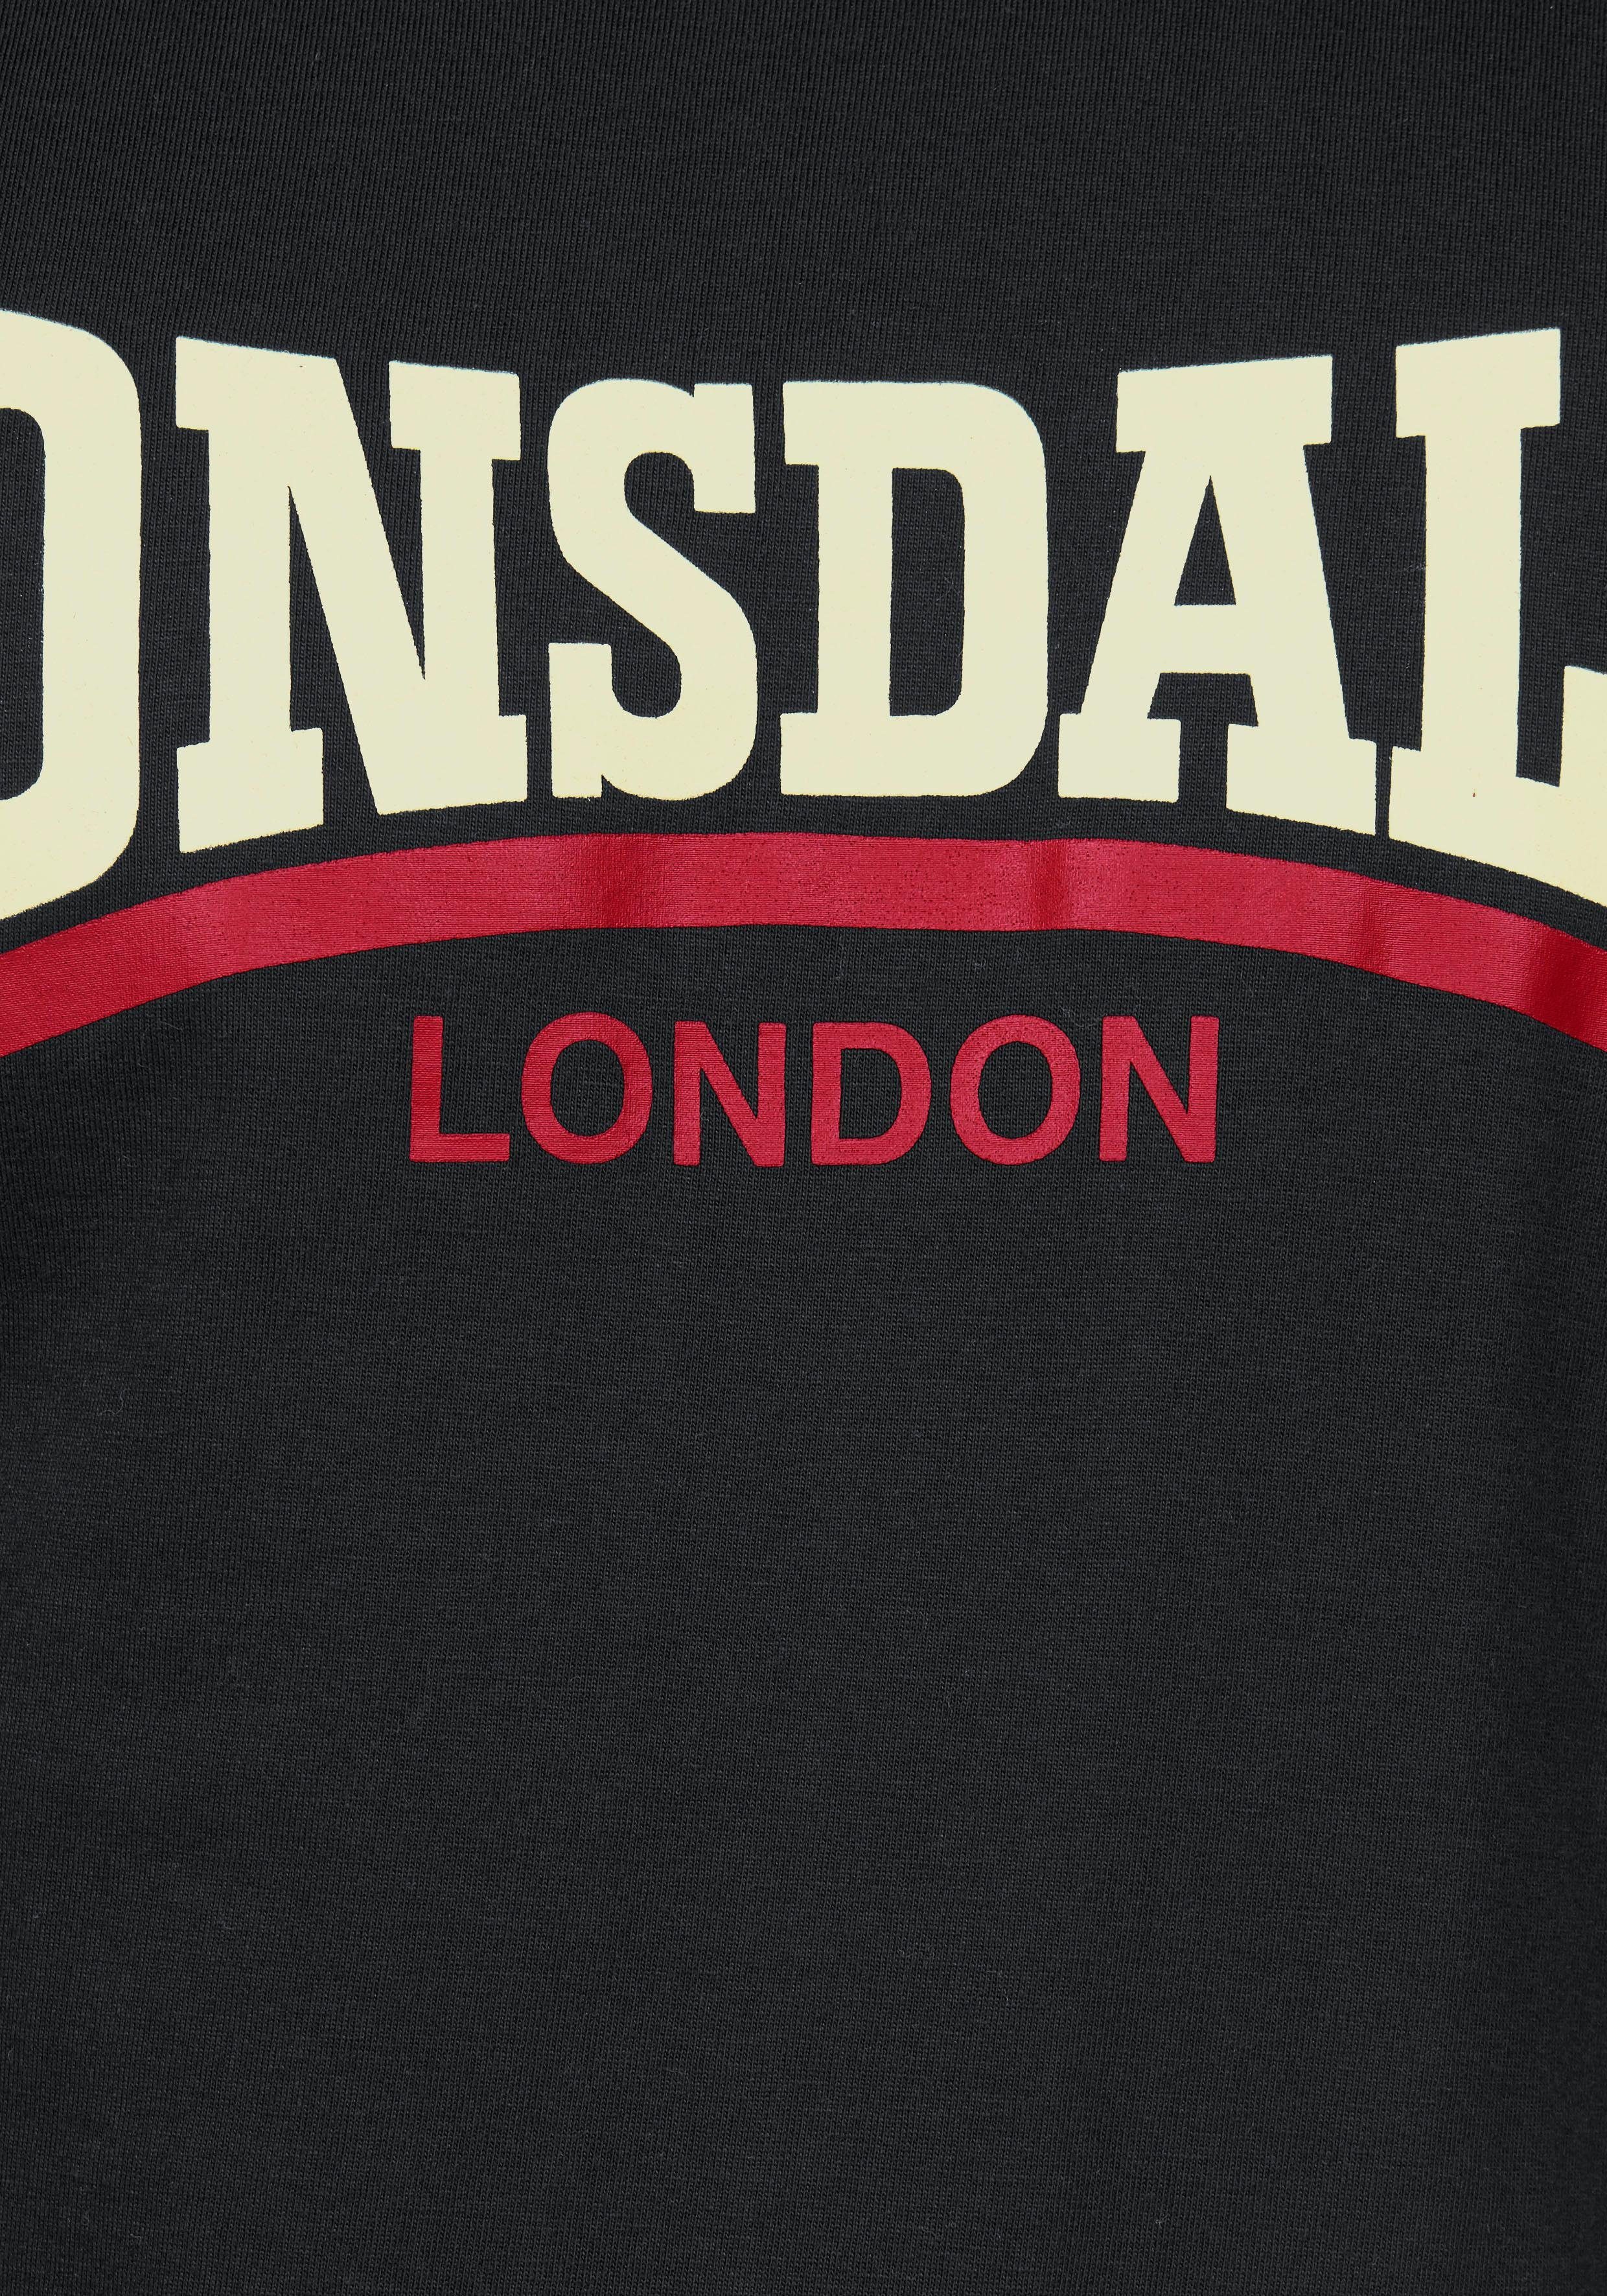 TWO T-Shirt TONE Lonsdale